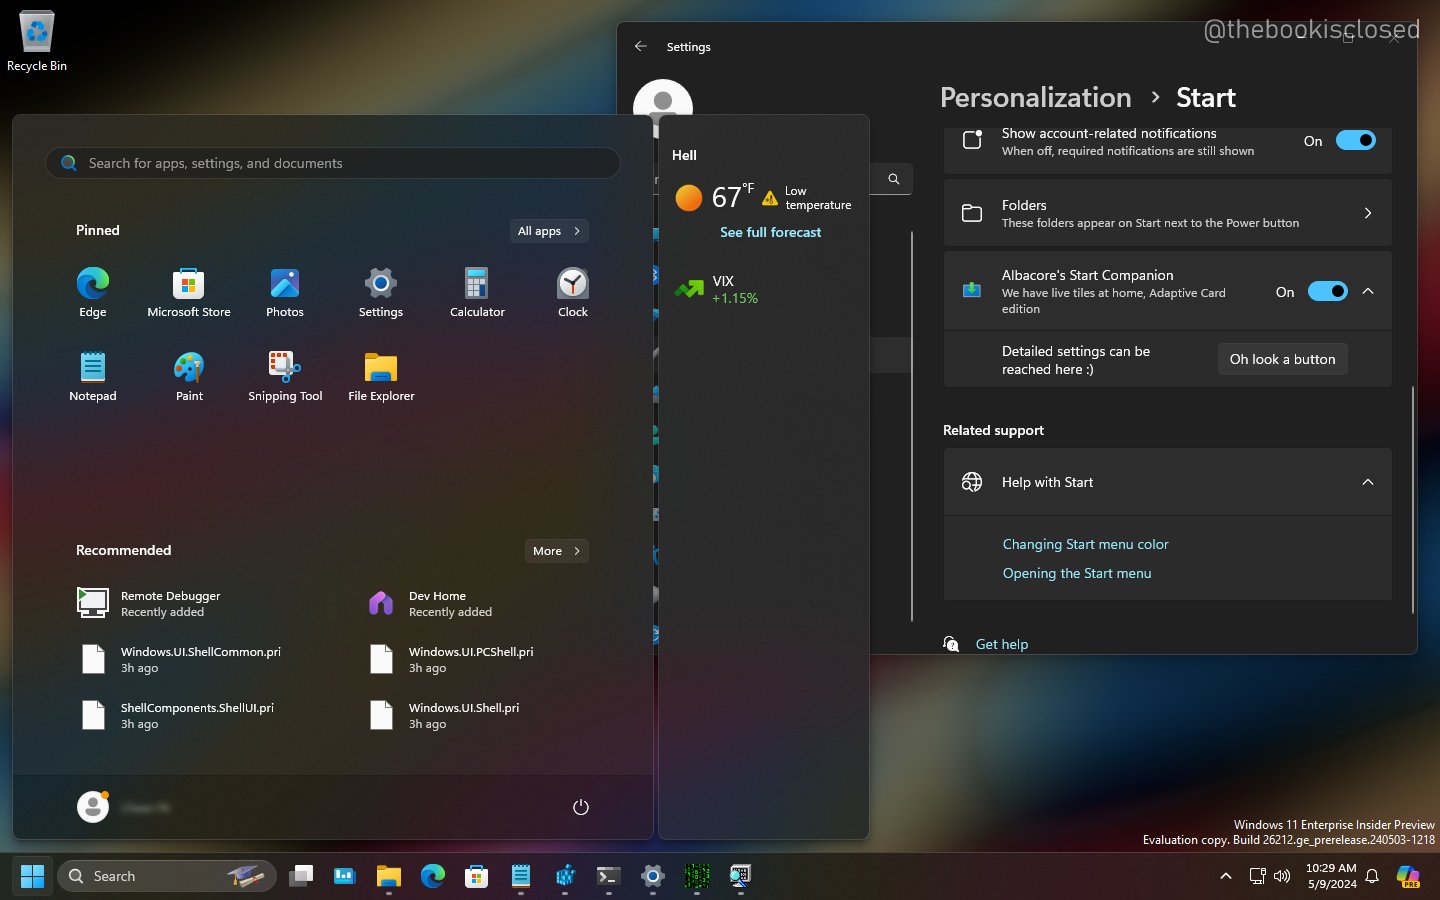 Windows 11’s Start Menu could soon get even busier with floating widgets